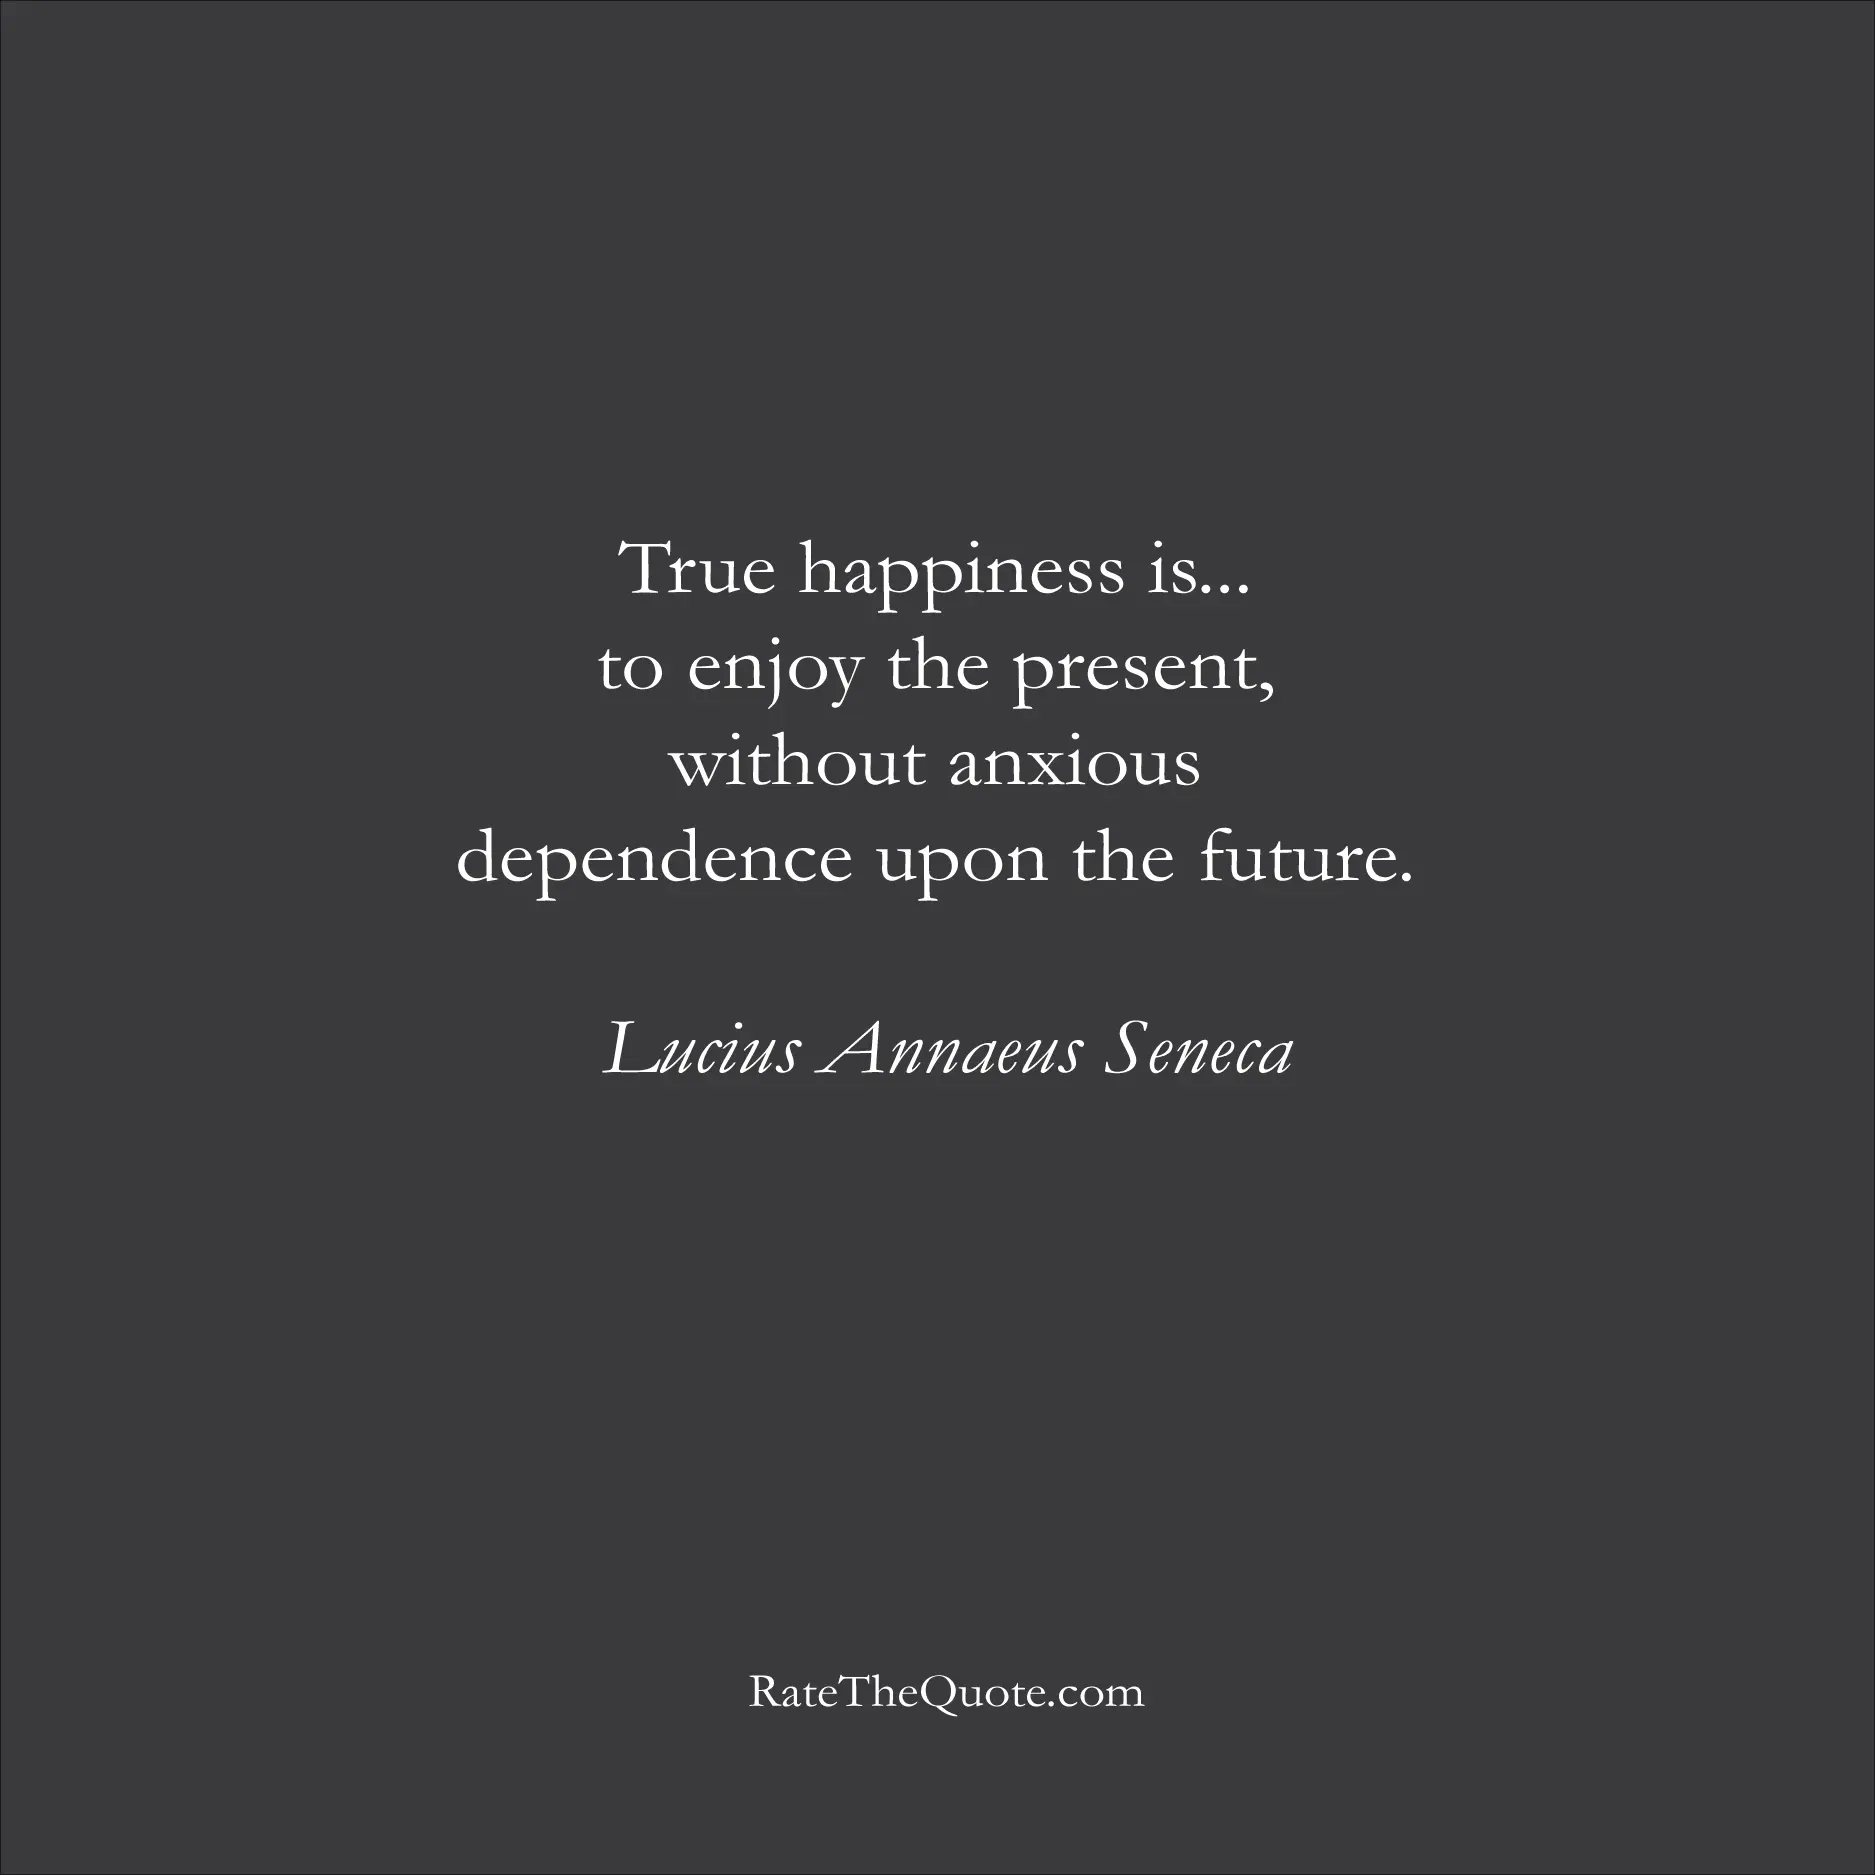 Happiness Quotes True happiness is... to enjoy the present, without anxious dependence upon the future. Lucius Annaeus Seneca